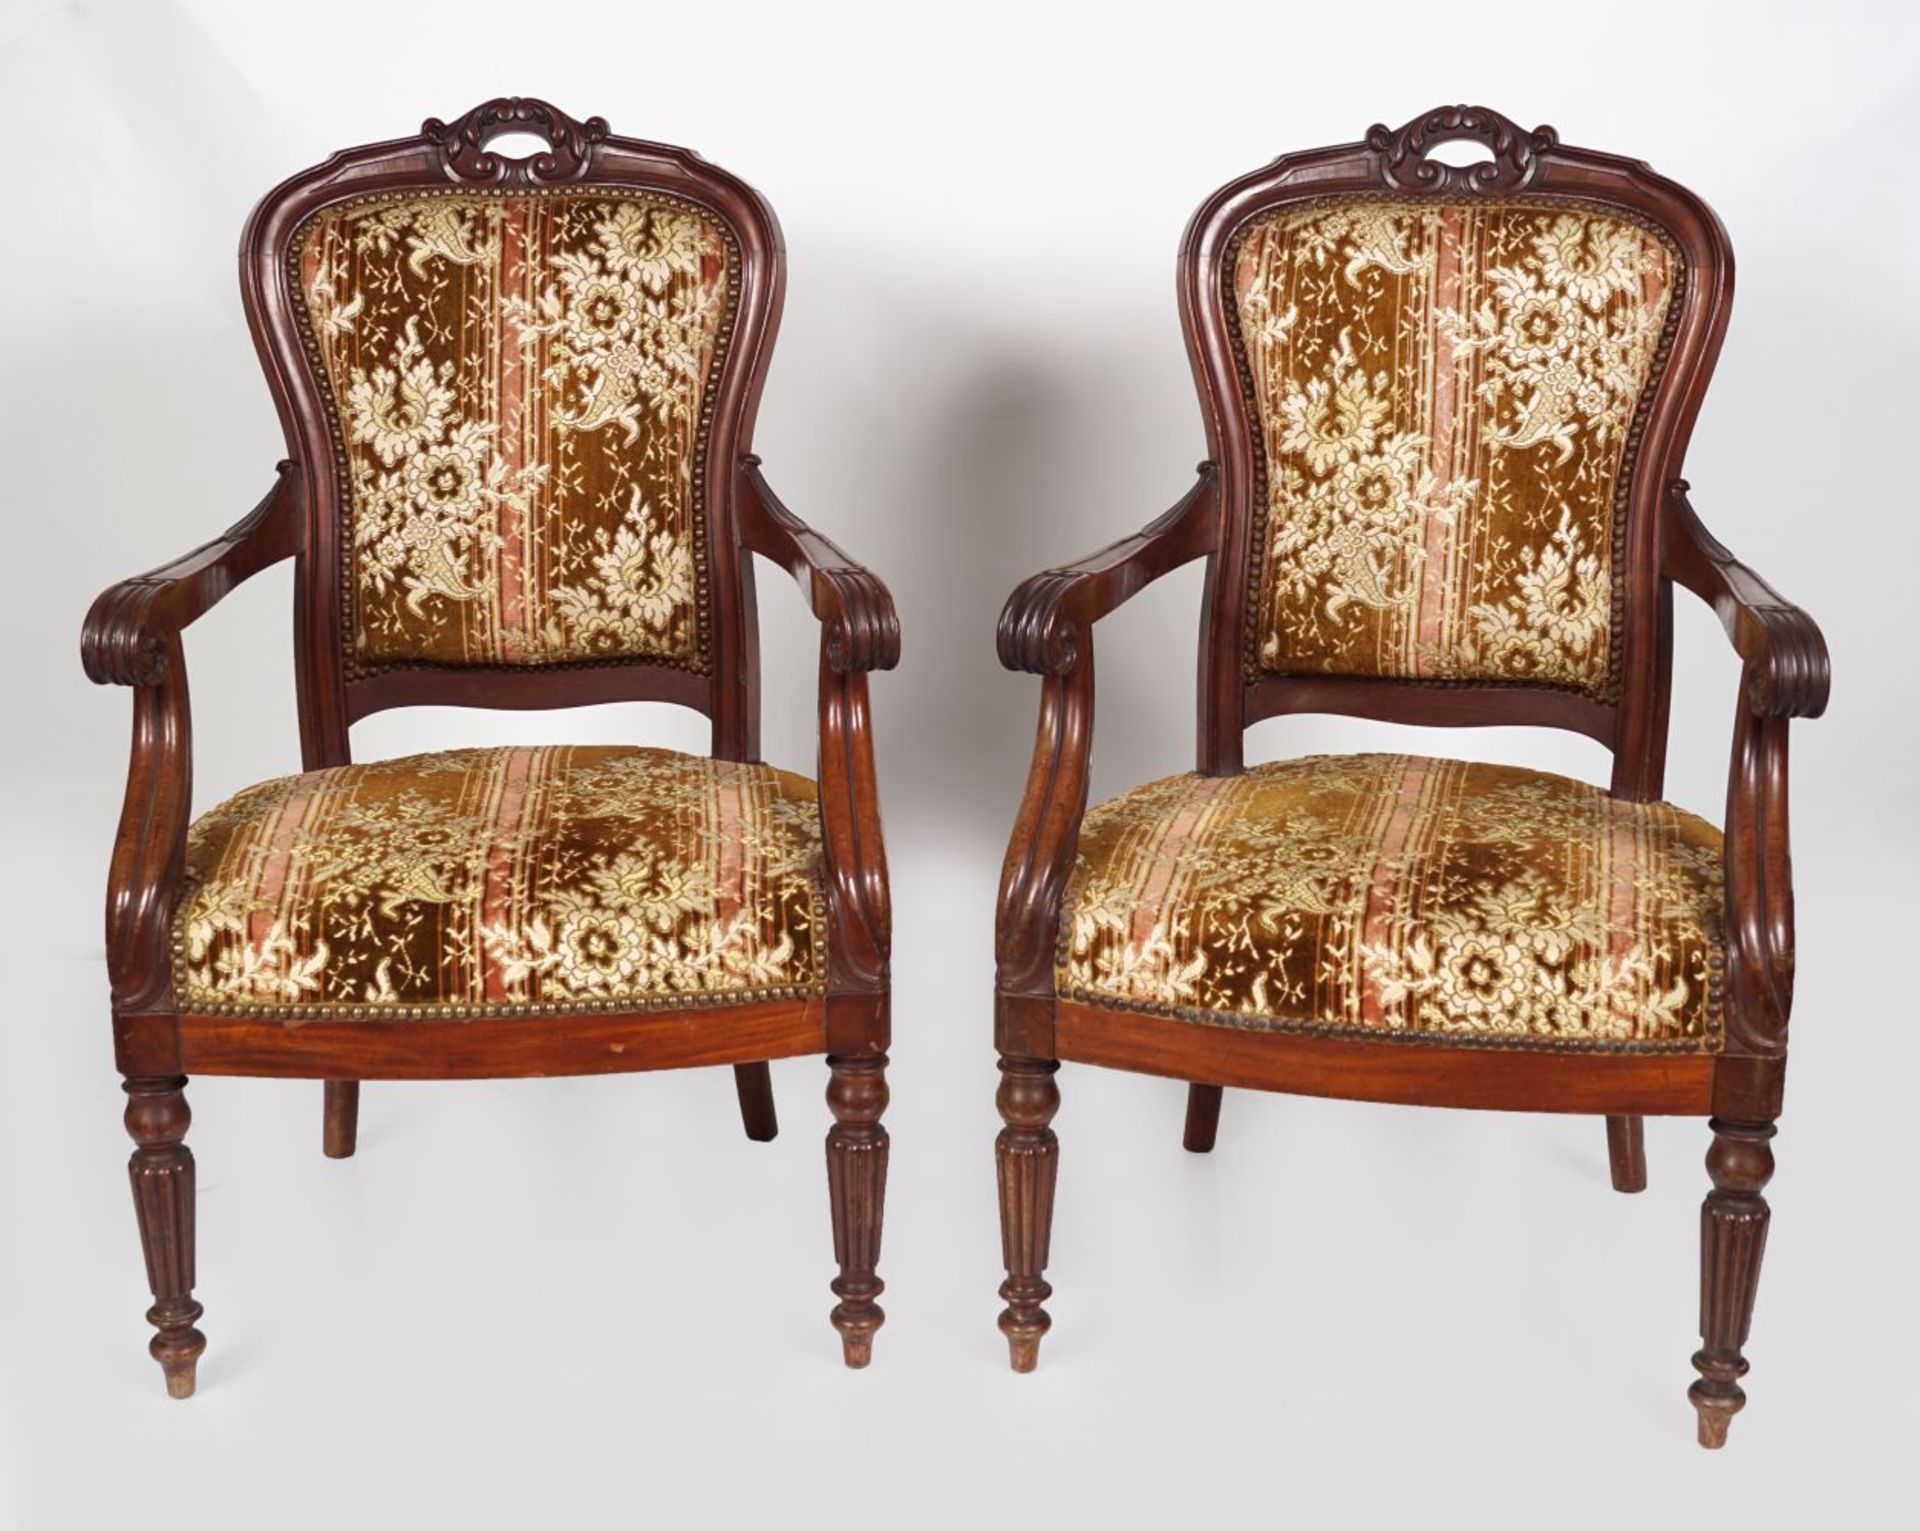 PAIR OF 19TH-CENTURY FRENCH ARMCHAIRS